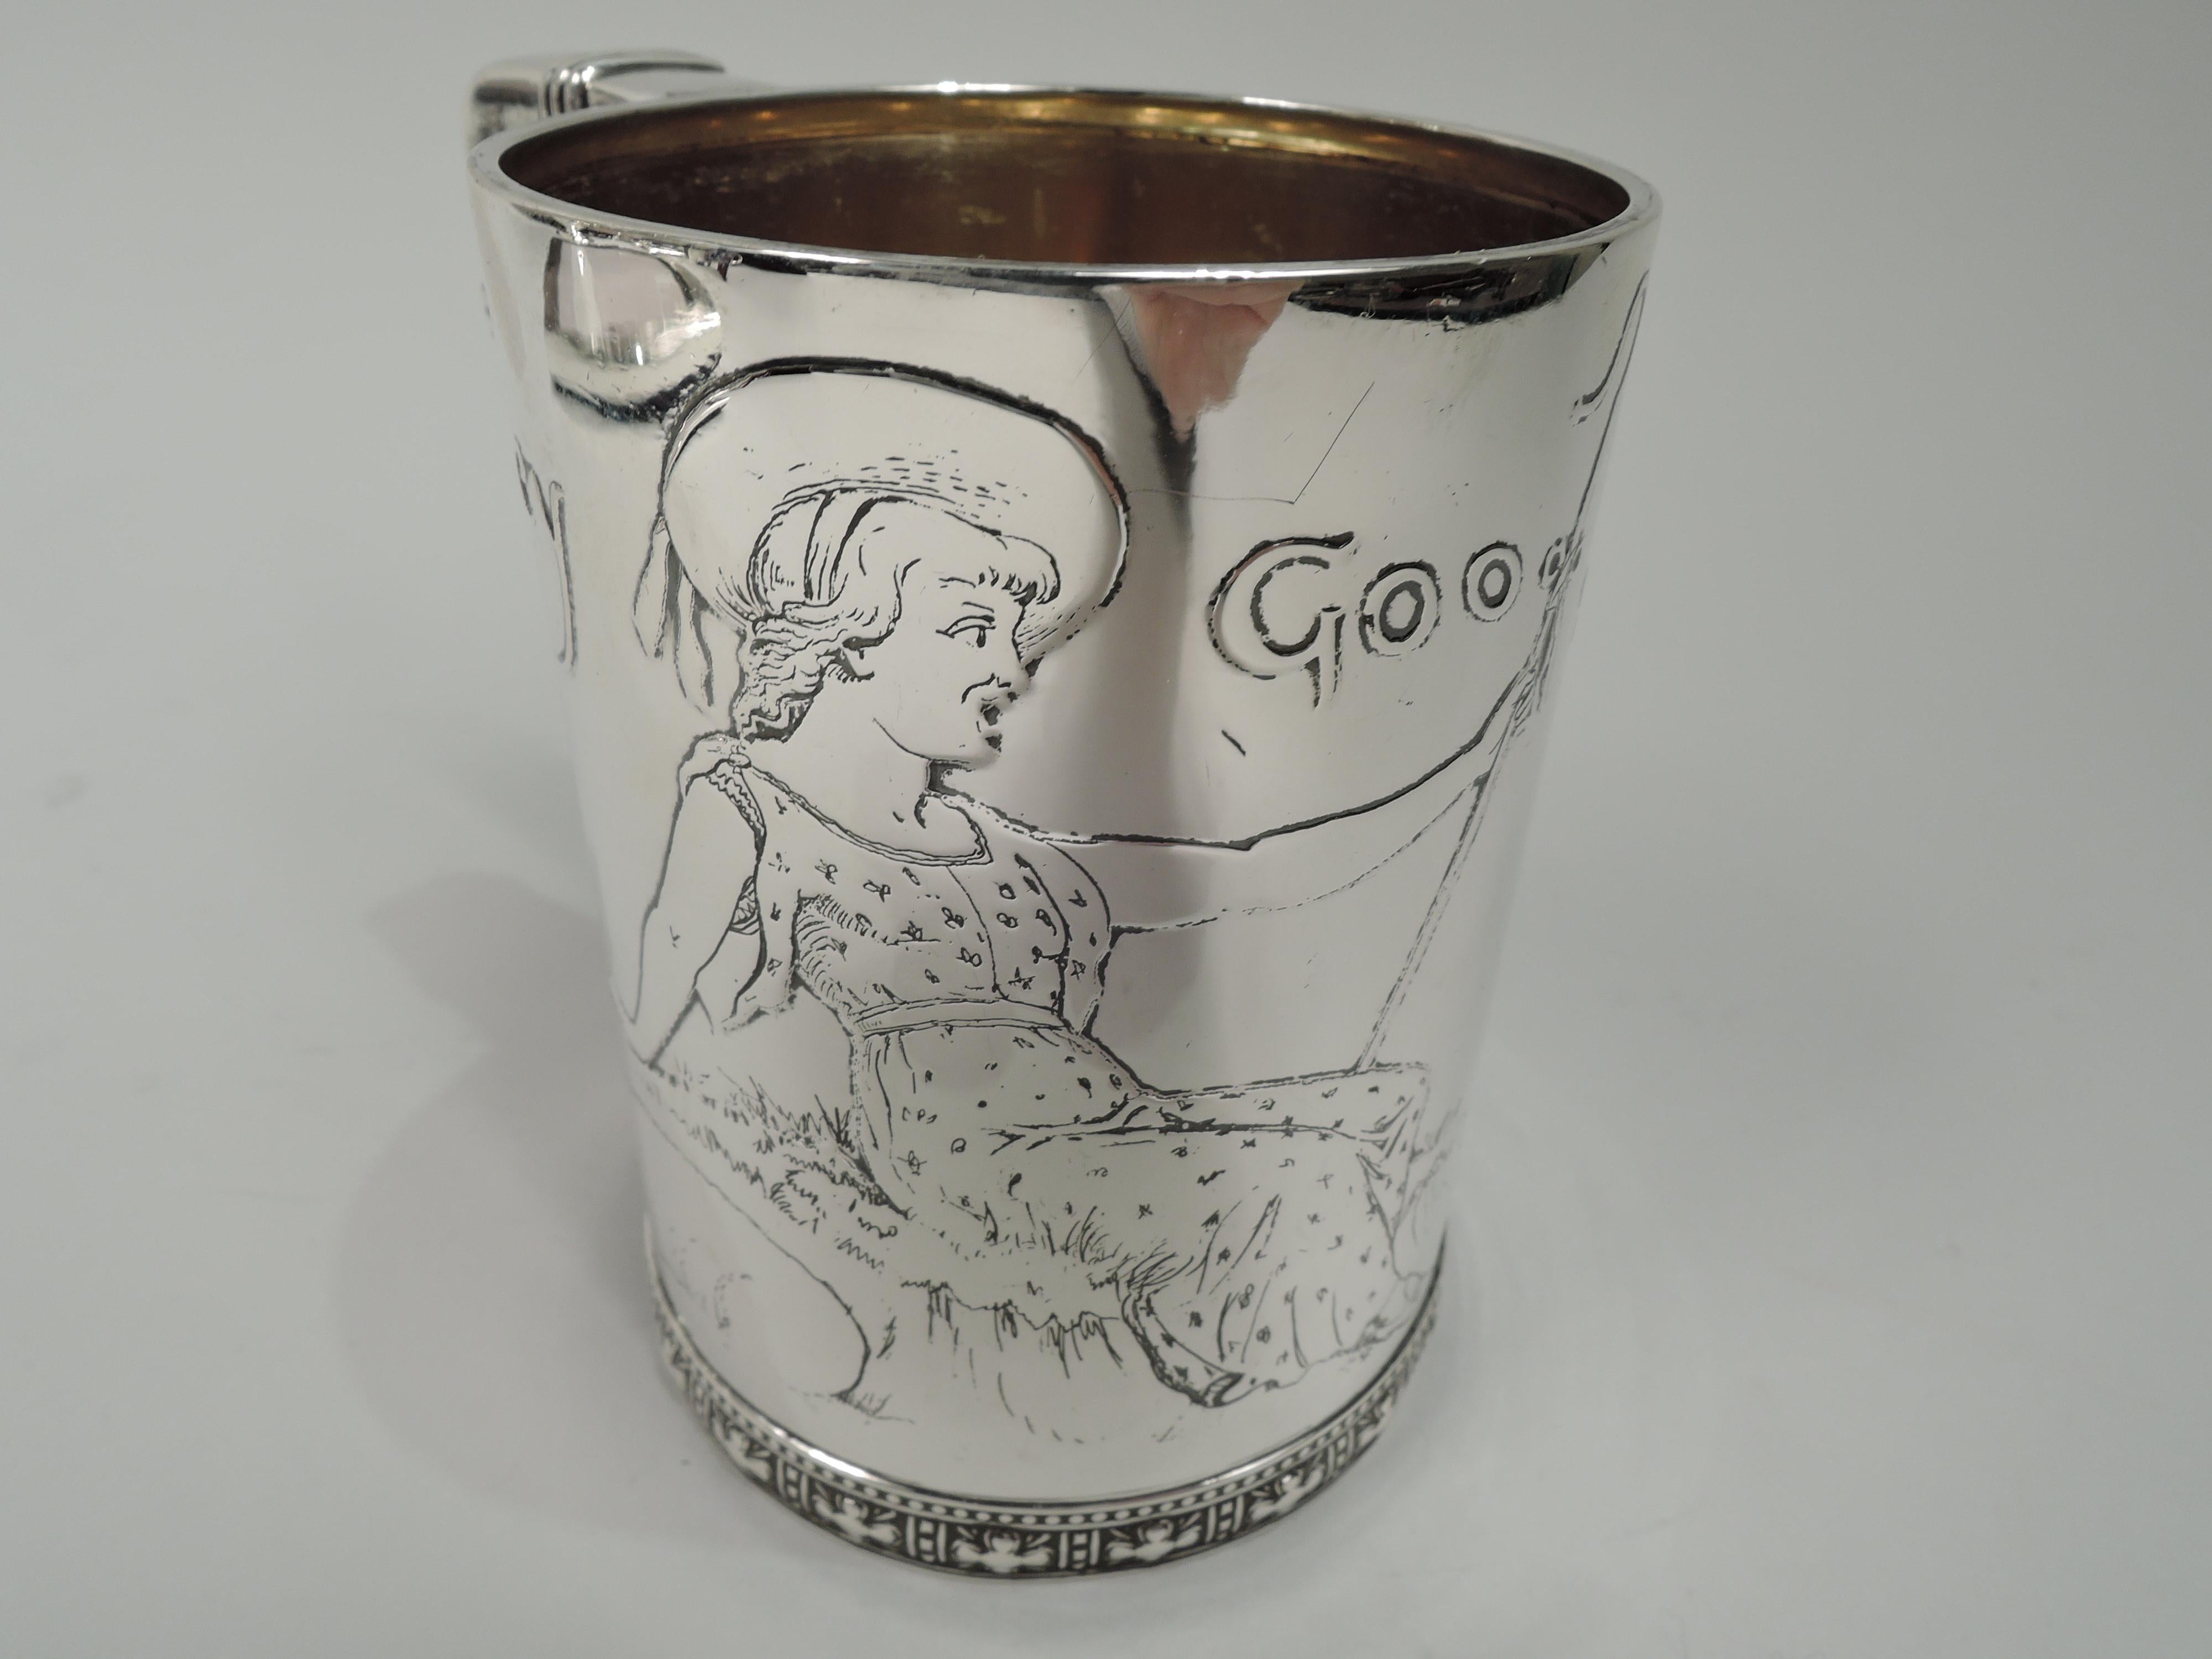 Victorian sterling silver baby cup. Made by Tiffany & Co. in New York. Straight sides and banded scroll-bracket handle. Low-relief base ornament with stylized flower heads and beading. Acid-etched depiction of Goosey Gander, an English nursery rhyme